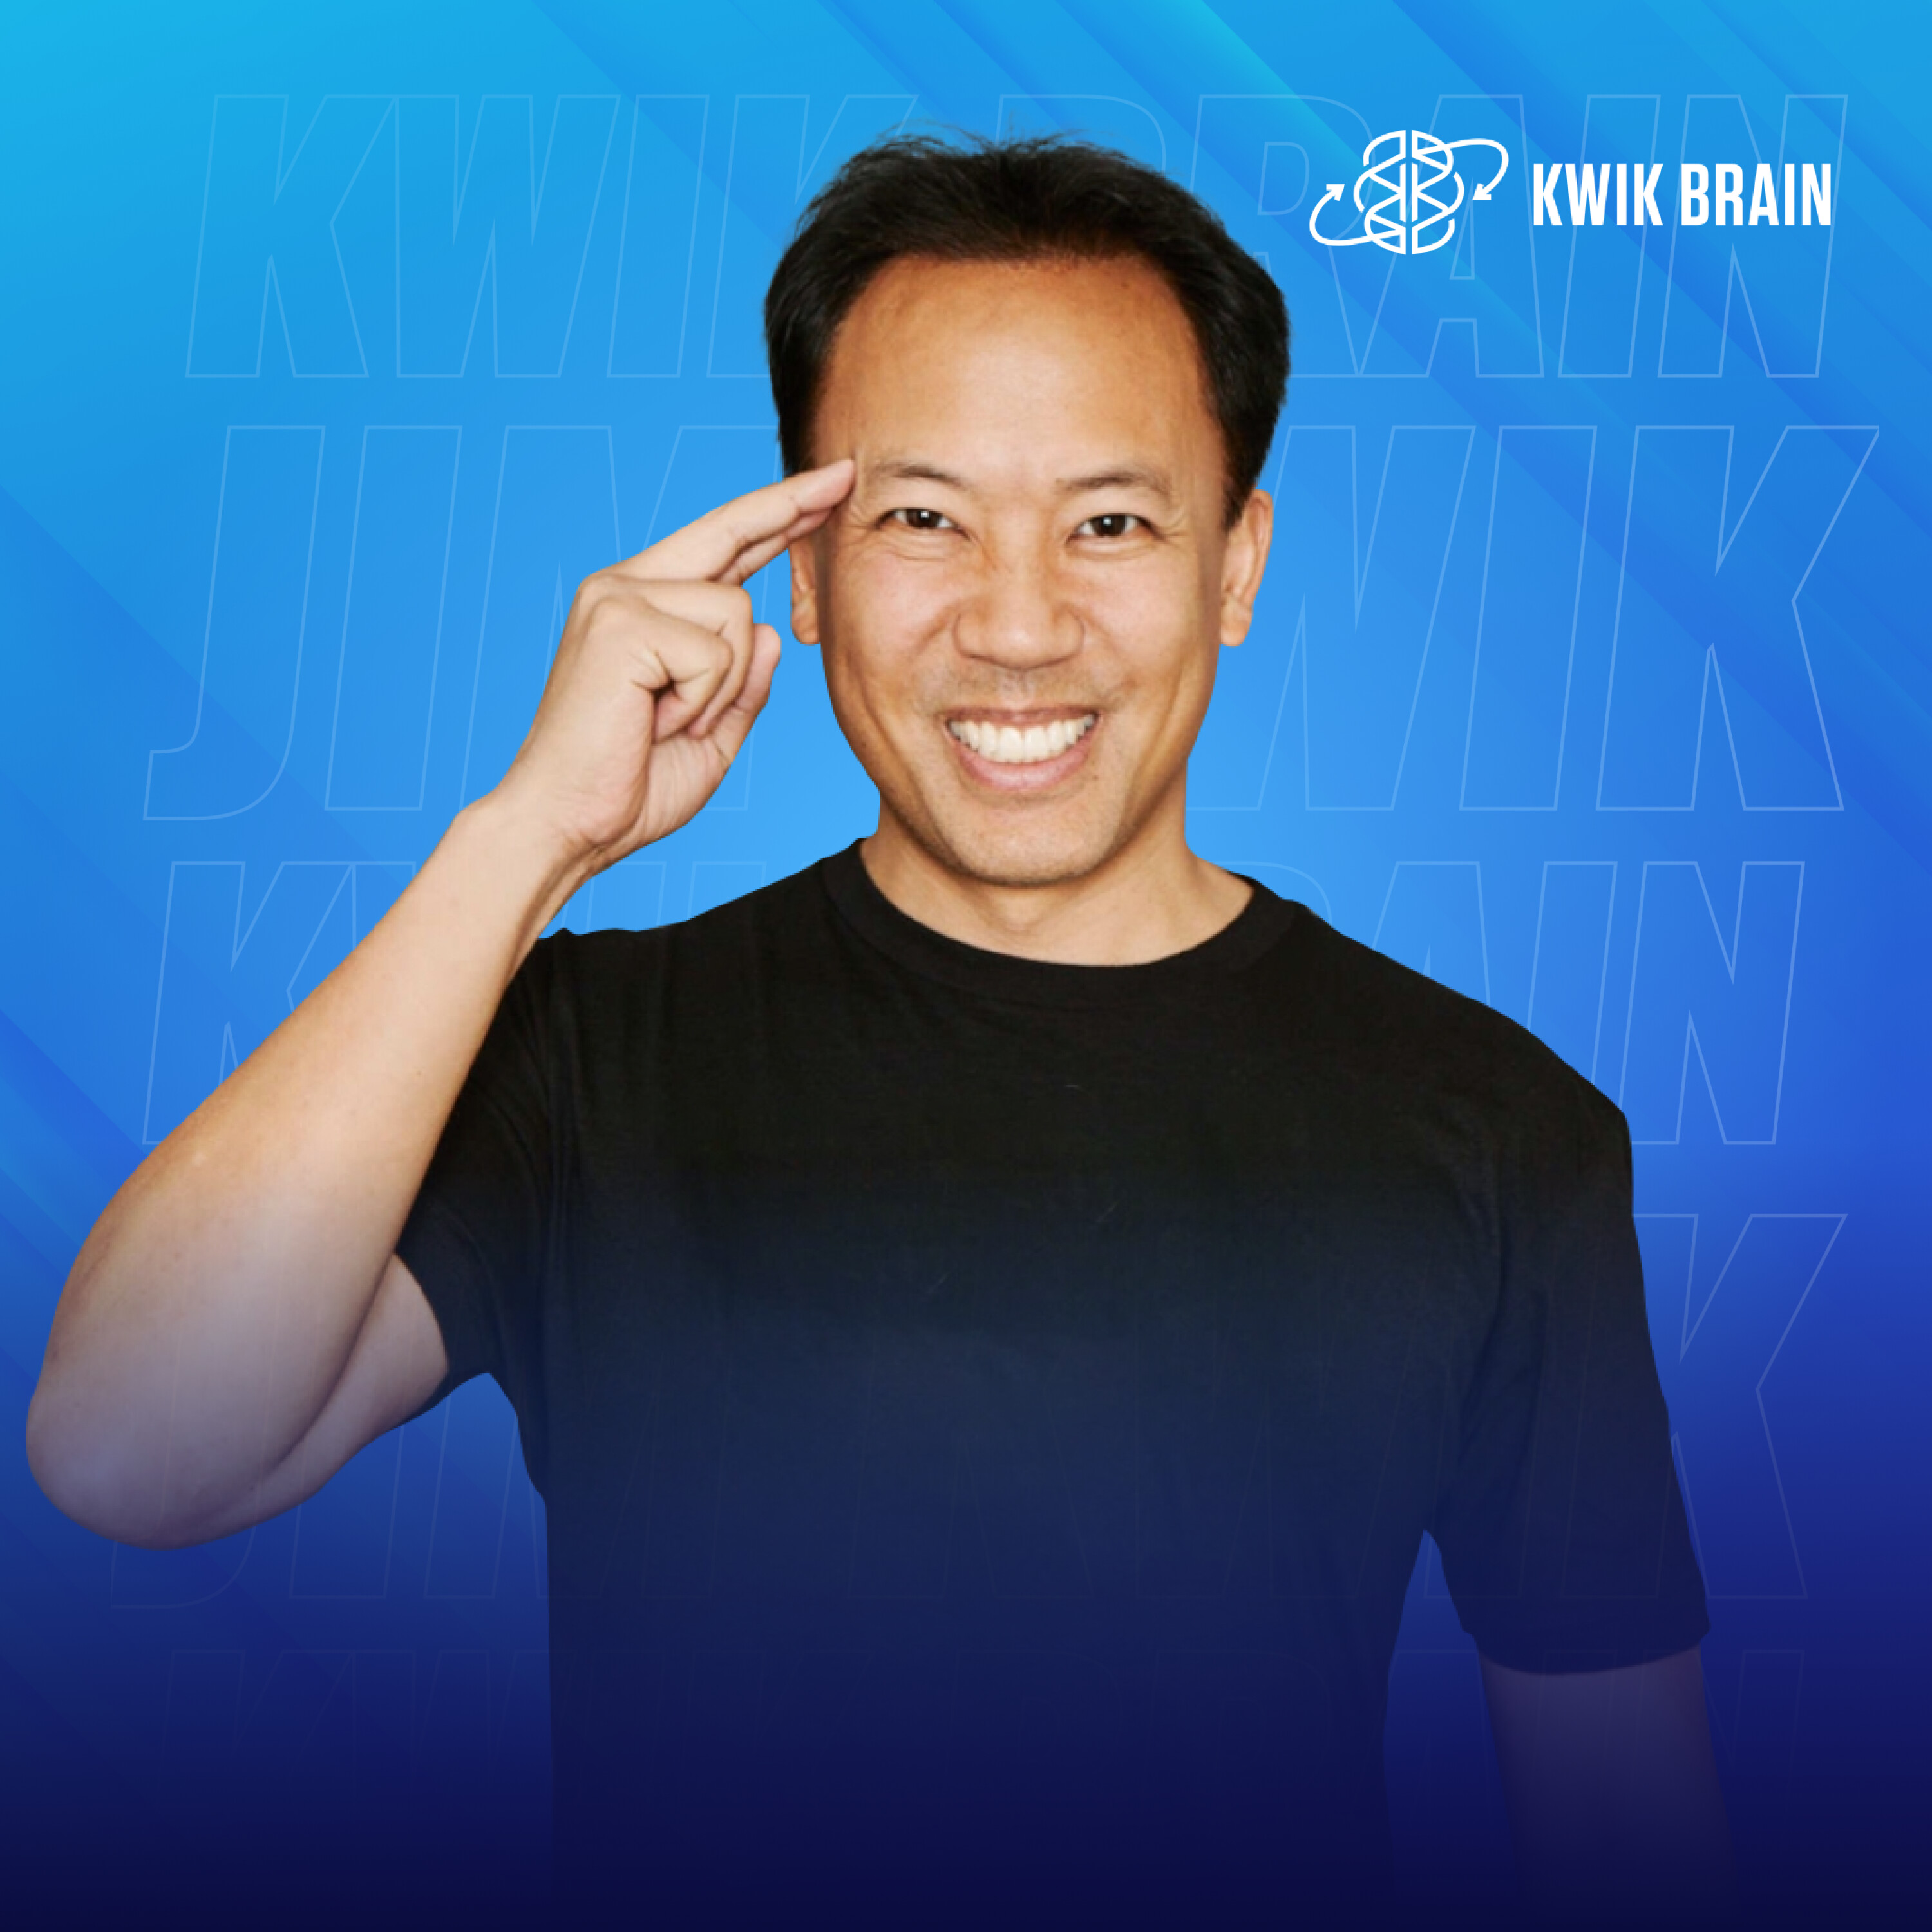 The Power of Meditation to Find Calm Amidst the Chaos with Jim Kwik